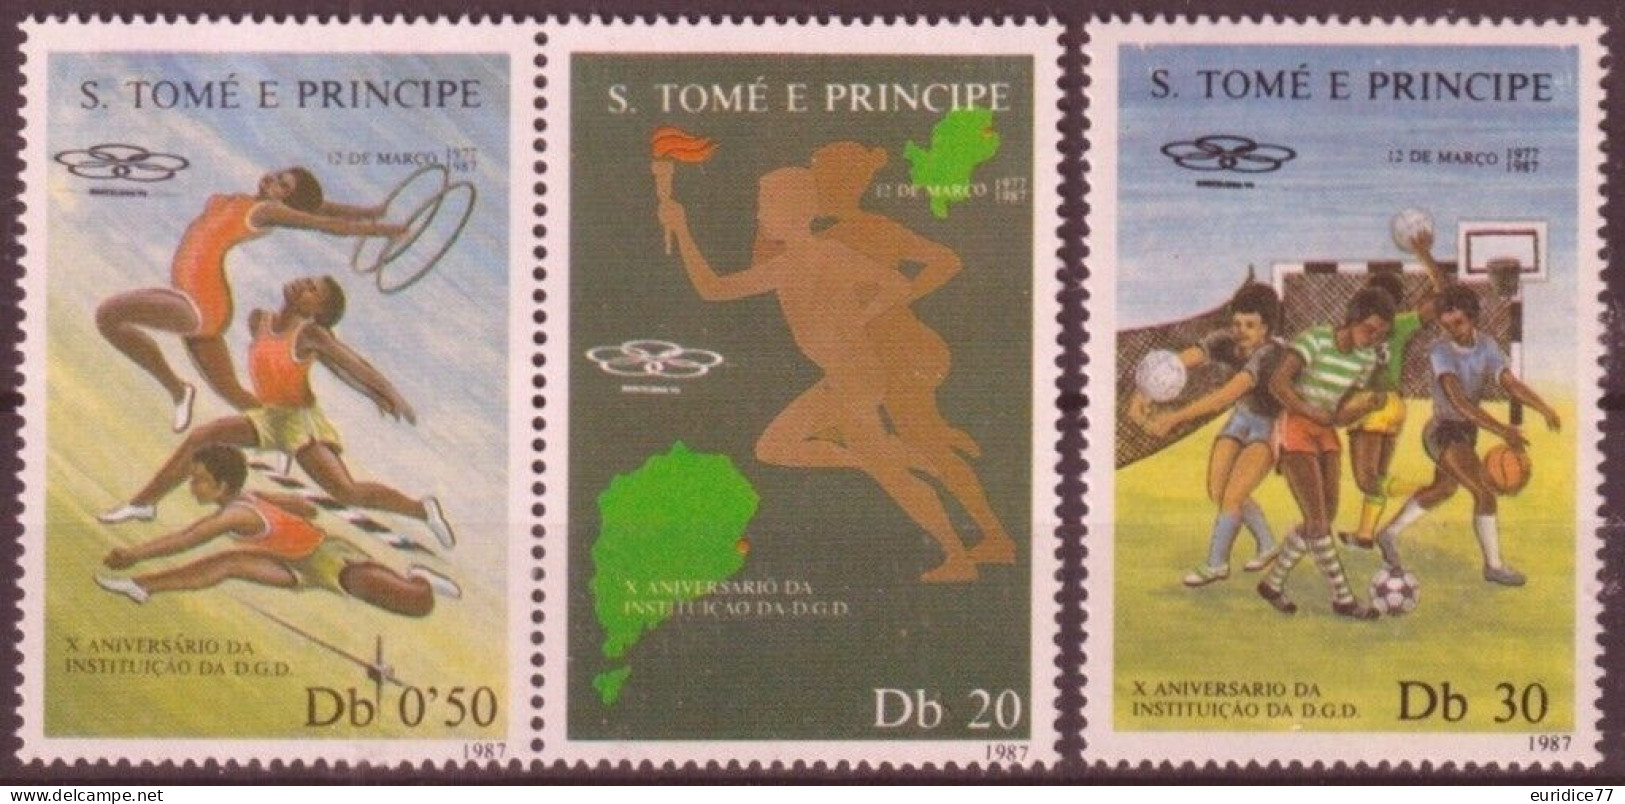 Sto. Tome & Principe 1987 - Olympic Games Barcelona 92 Gold Mnh** - Ete 1992: Barcelone